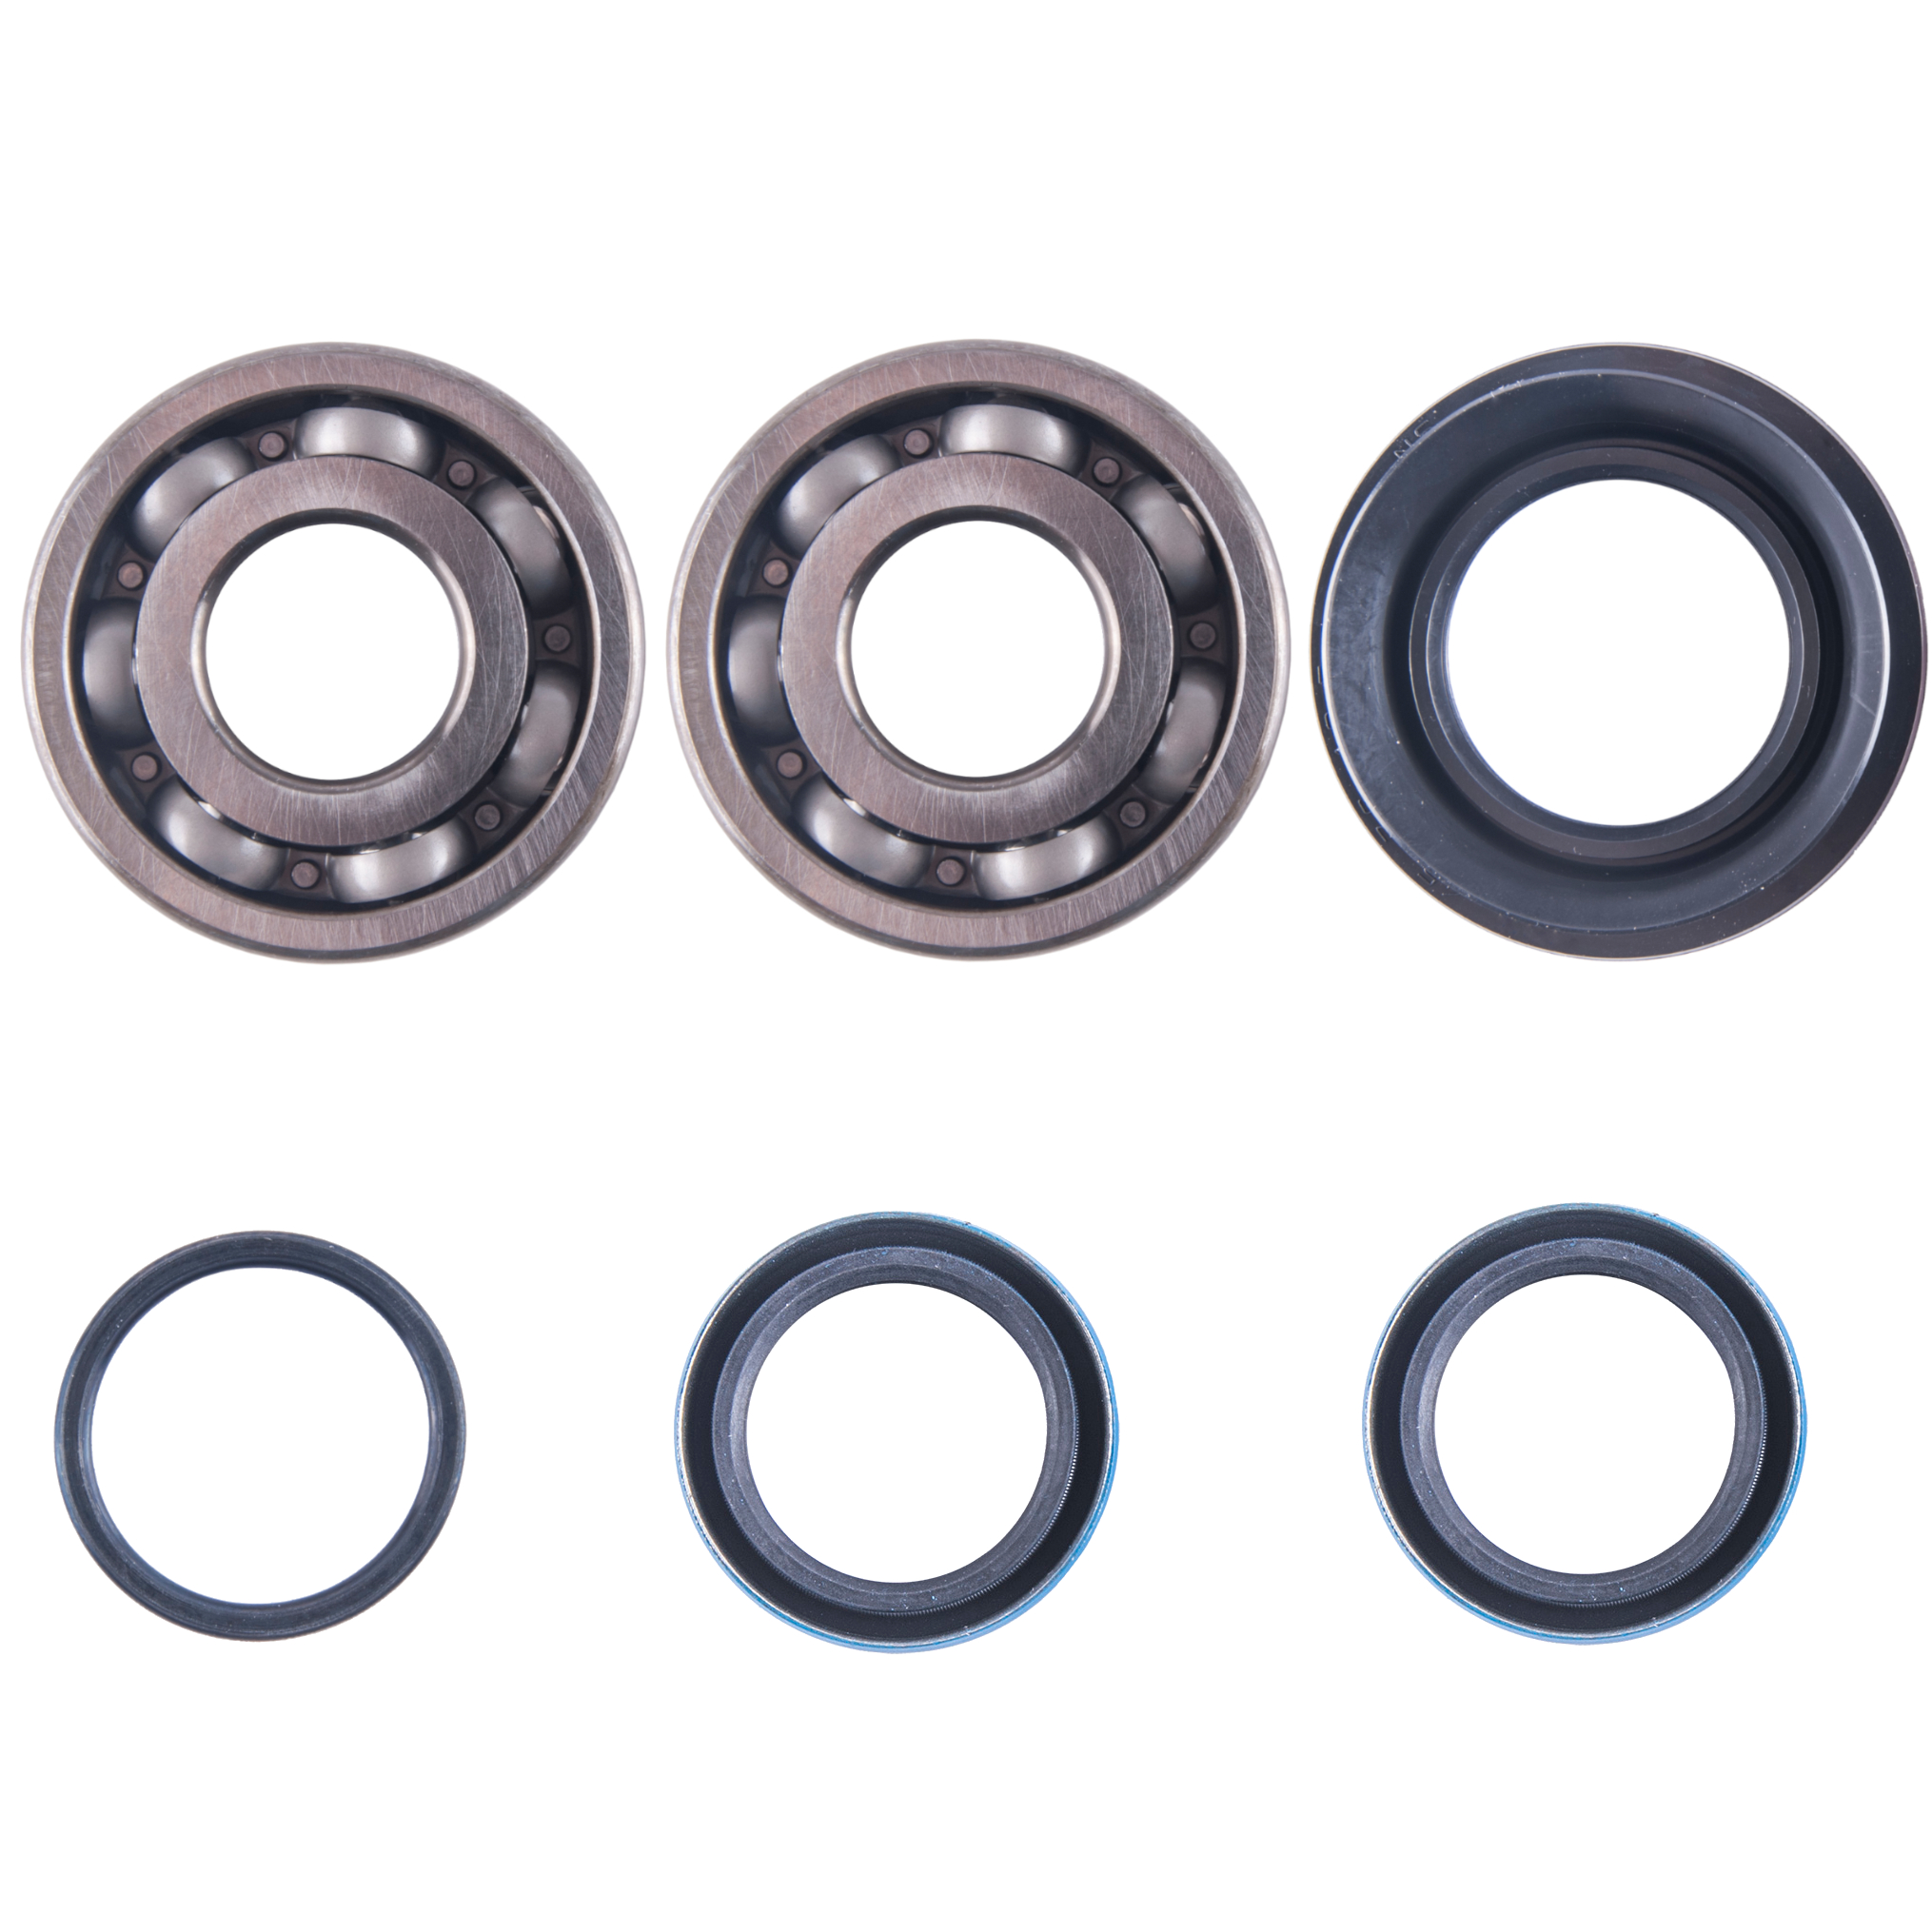 East Lake Axle replacement for Axle Carrier Brake Drum Bearings and Seals Kit Honda TRX 200 1990 1991 1992 1993 1994 1995 1996 